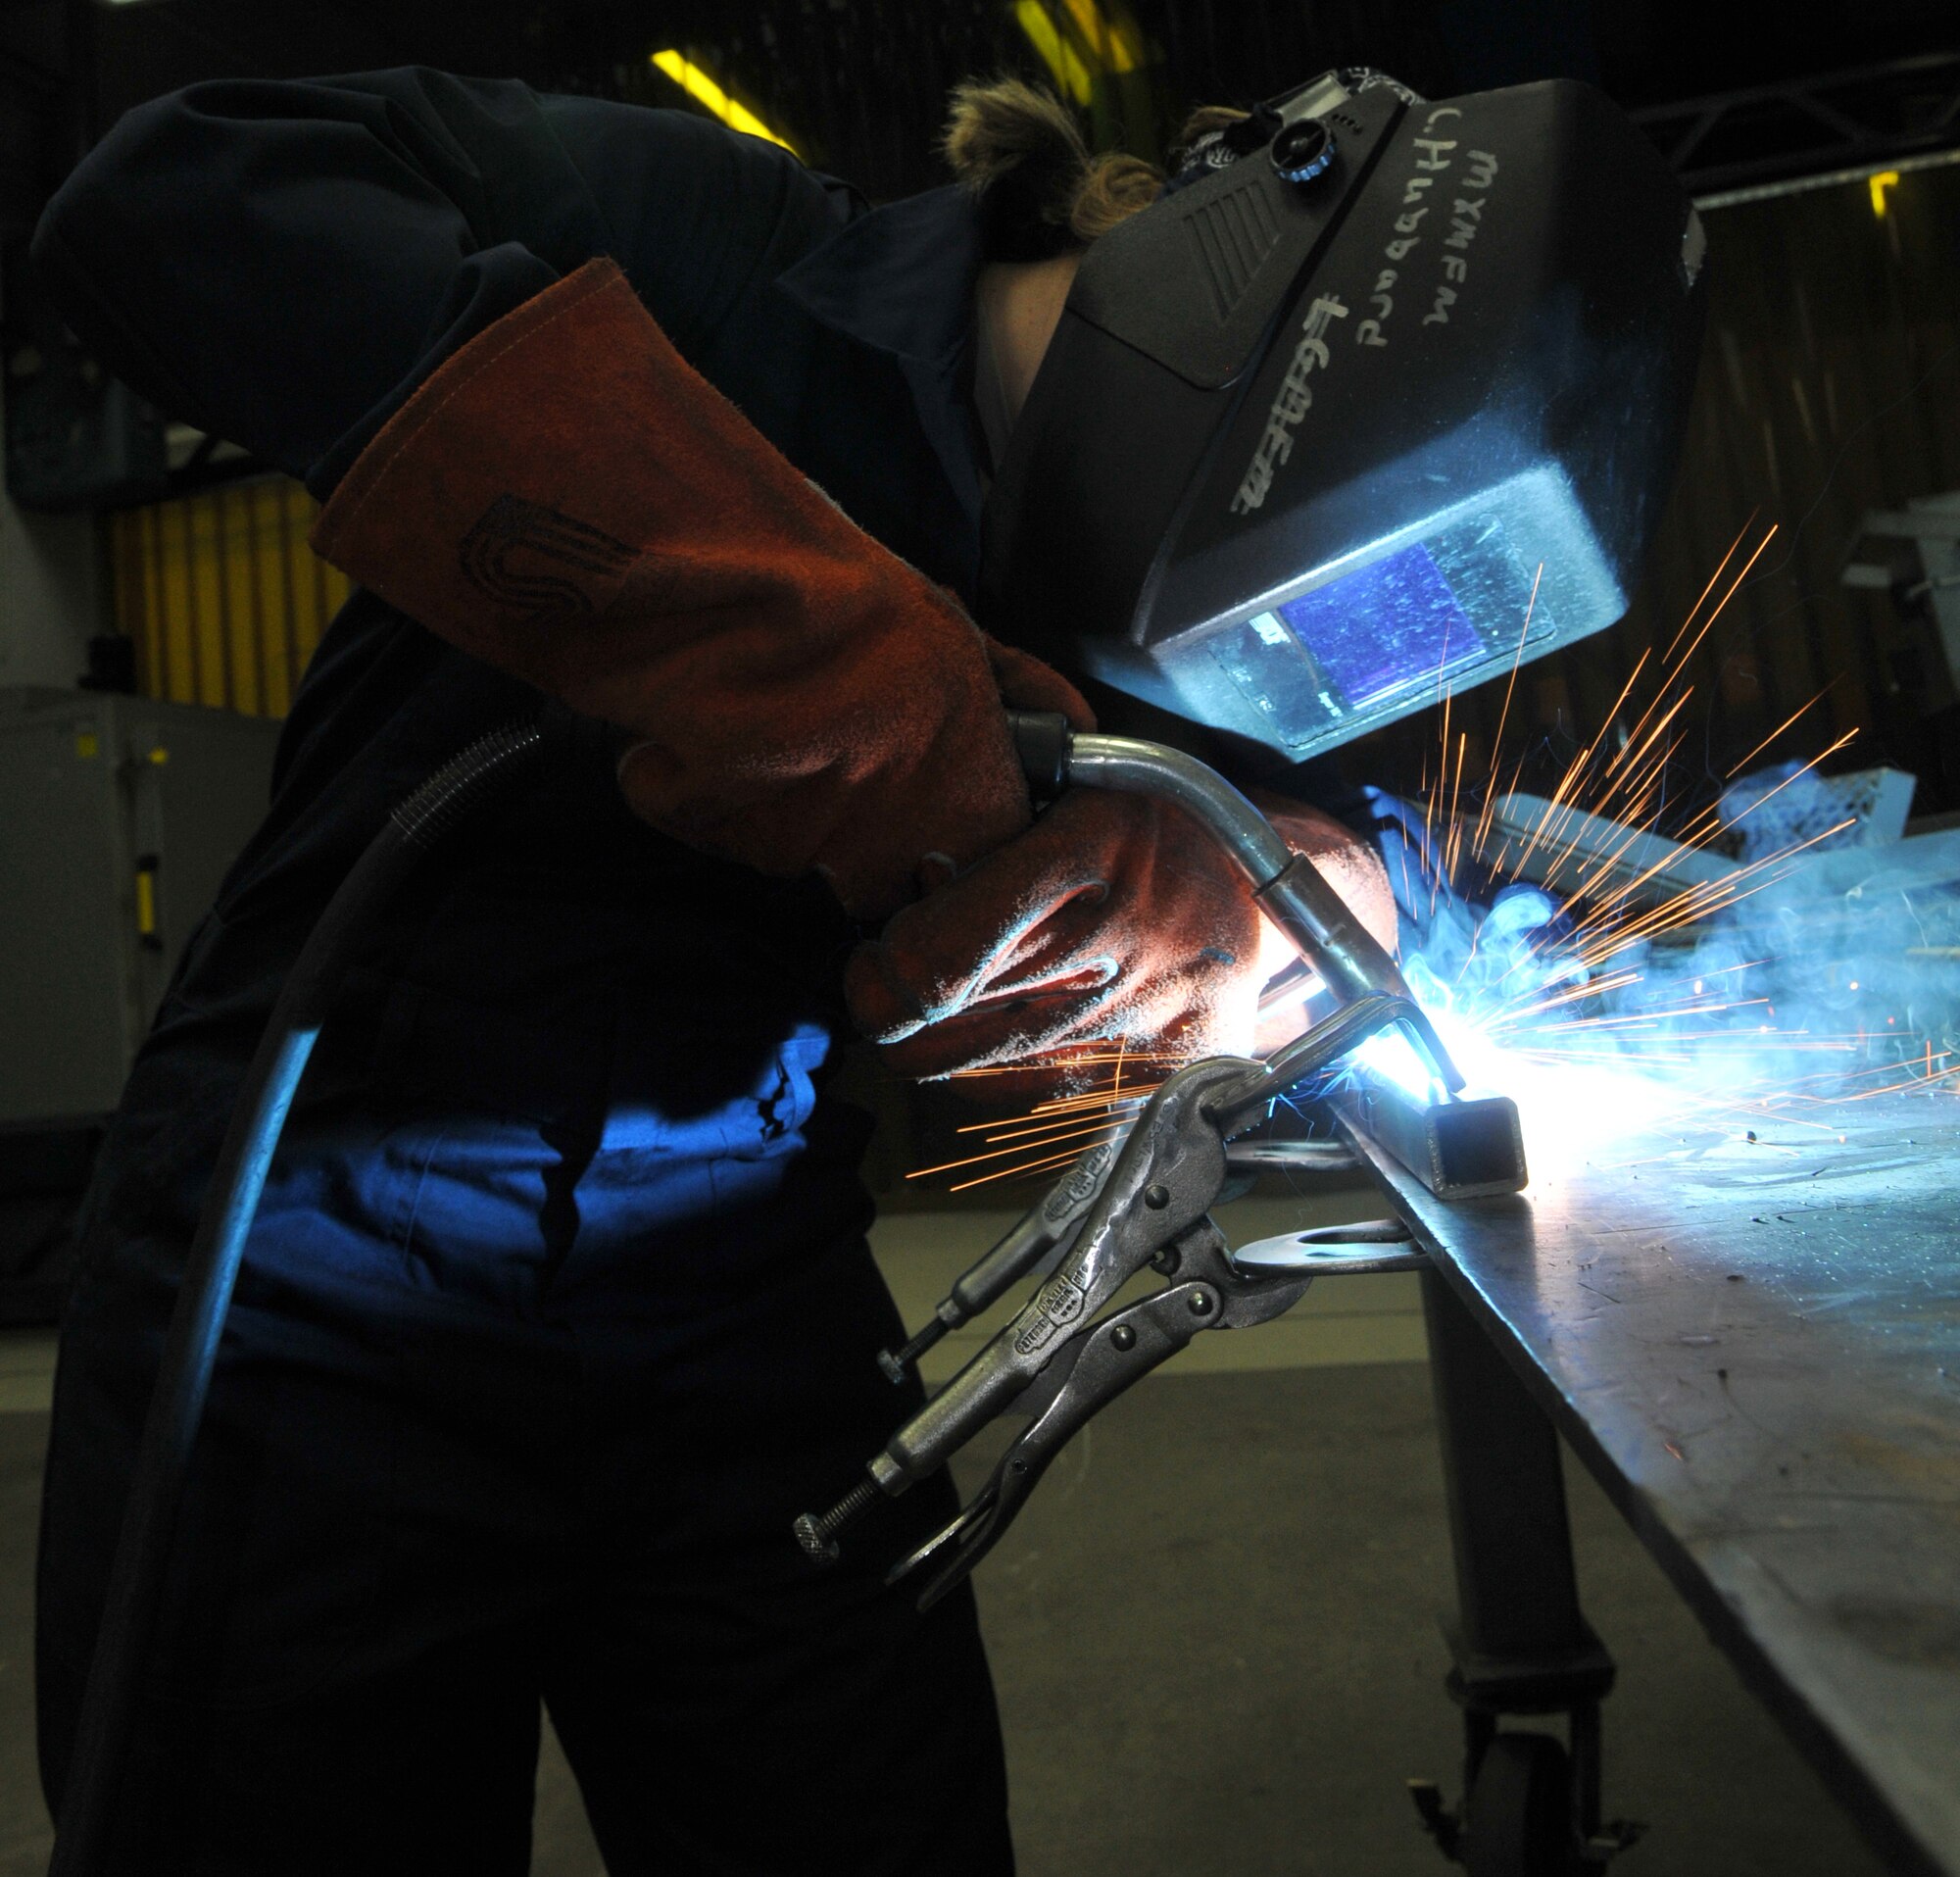 SPANGDAHLEM AIR BASE, Germany -- Airman 1st Class Abigail Dressler, 52nd Equipment Maintenance Squadron, uses metal inert gas to weld a piece of equipment Jan. 22 in the metals technology welding room. This is done to fabricate aircraft support equipment such as stands for aircraft maintenance, power units and air conditioning units. (U.S. Air Force photo/Airman 1st Class Nick Wilson)